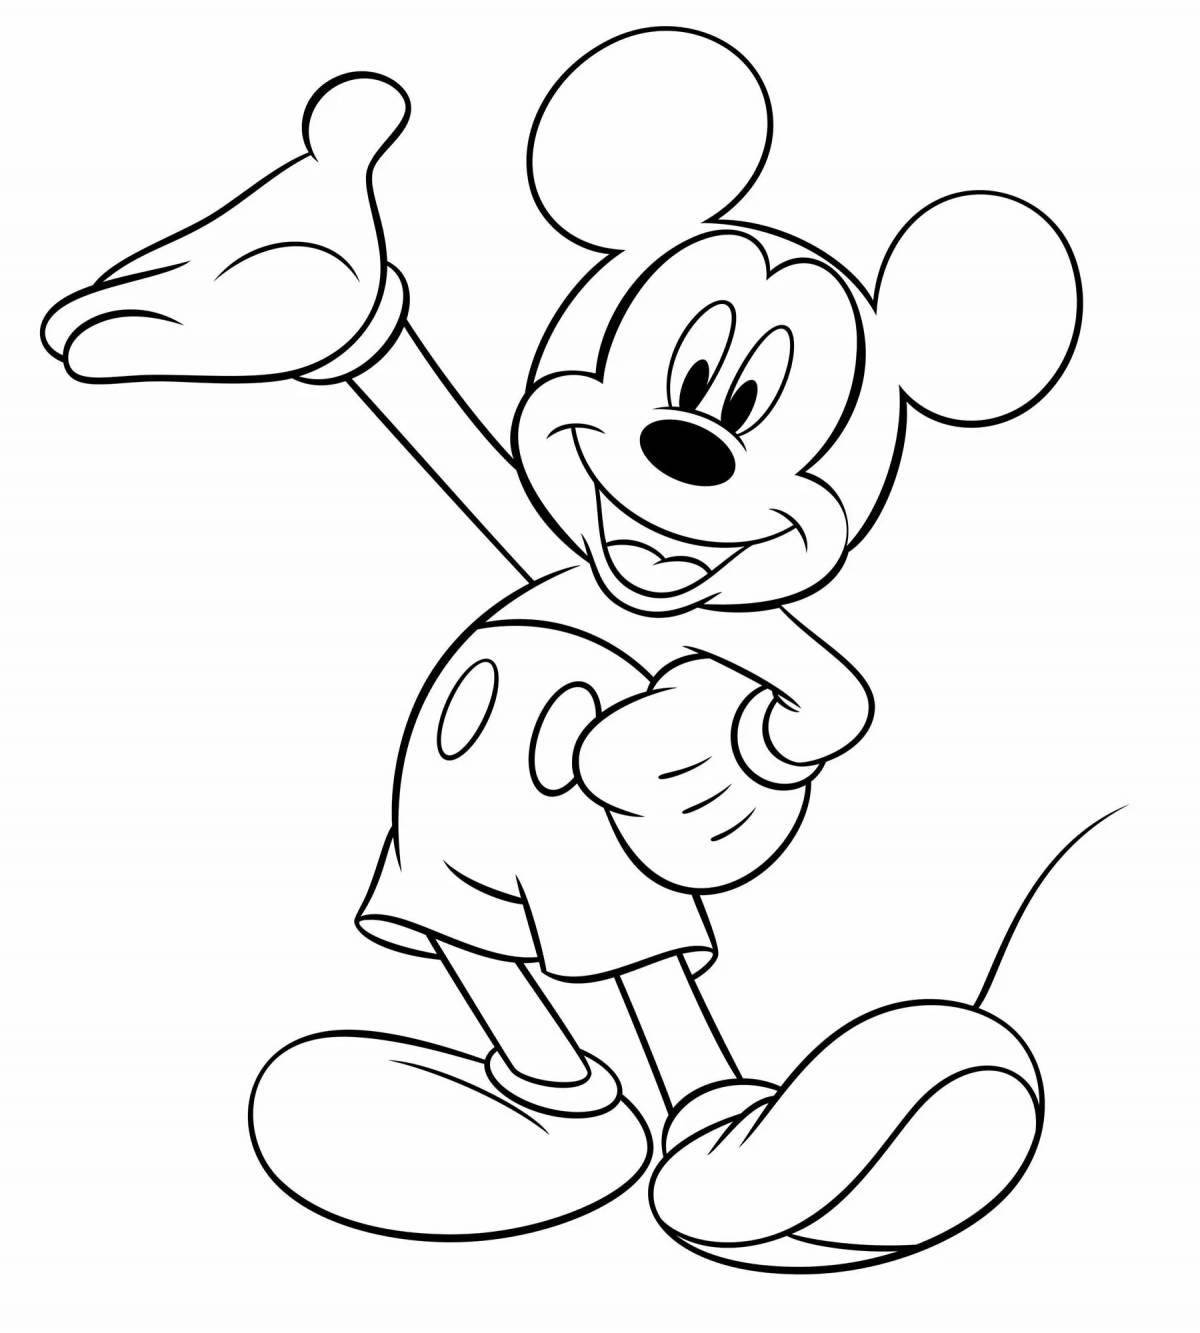 Adorable 3 year old cartoon coloring book